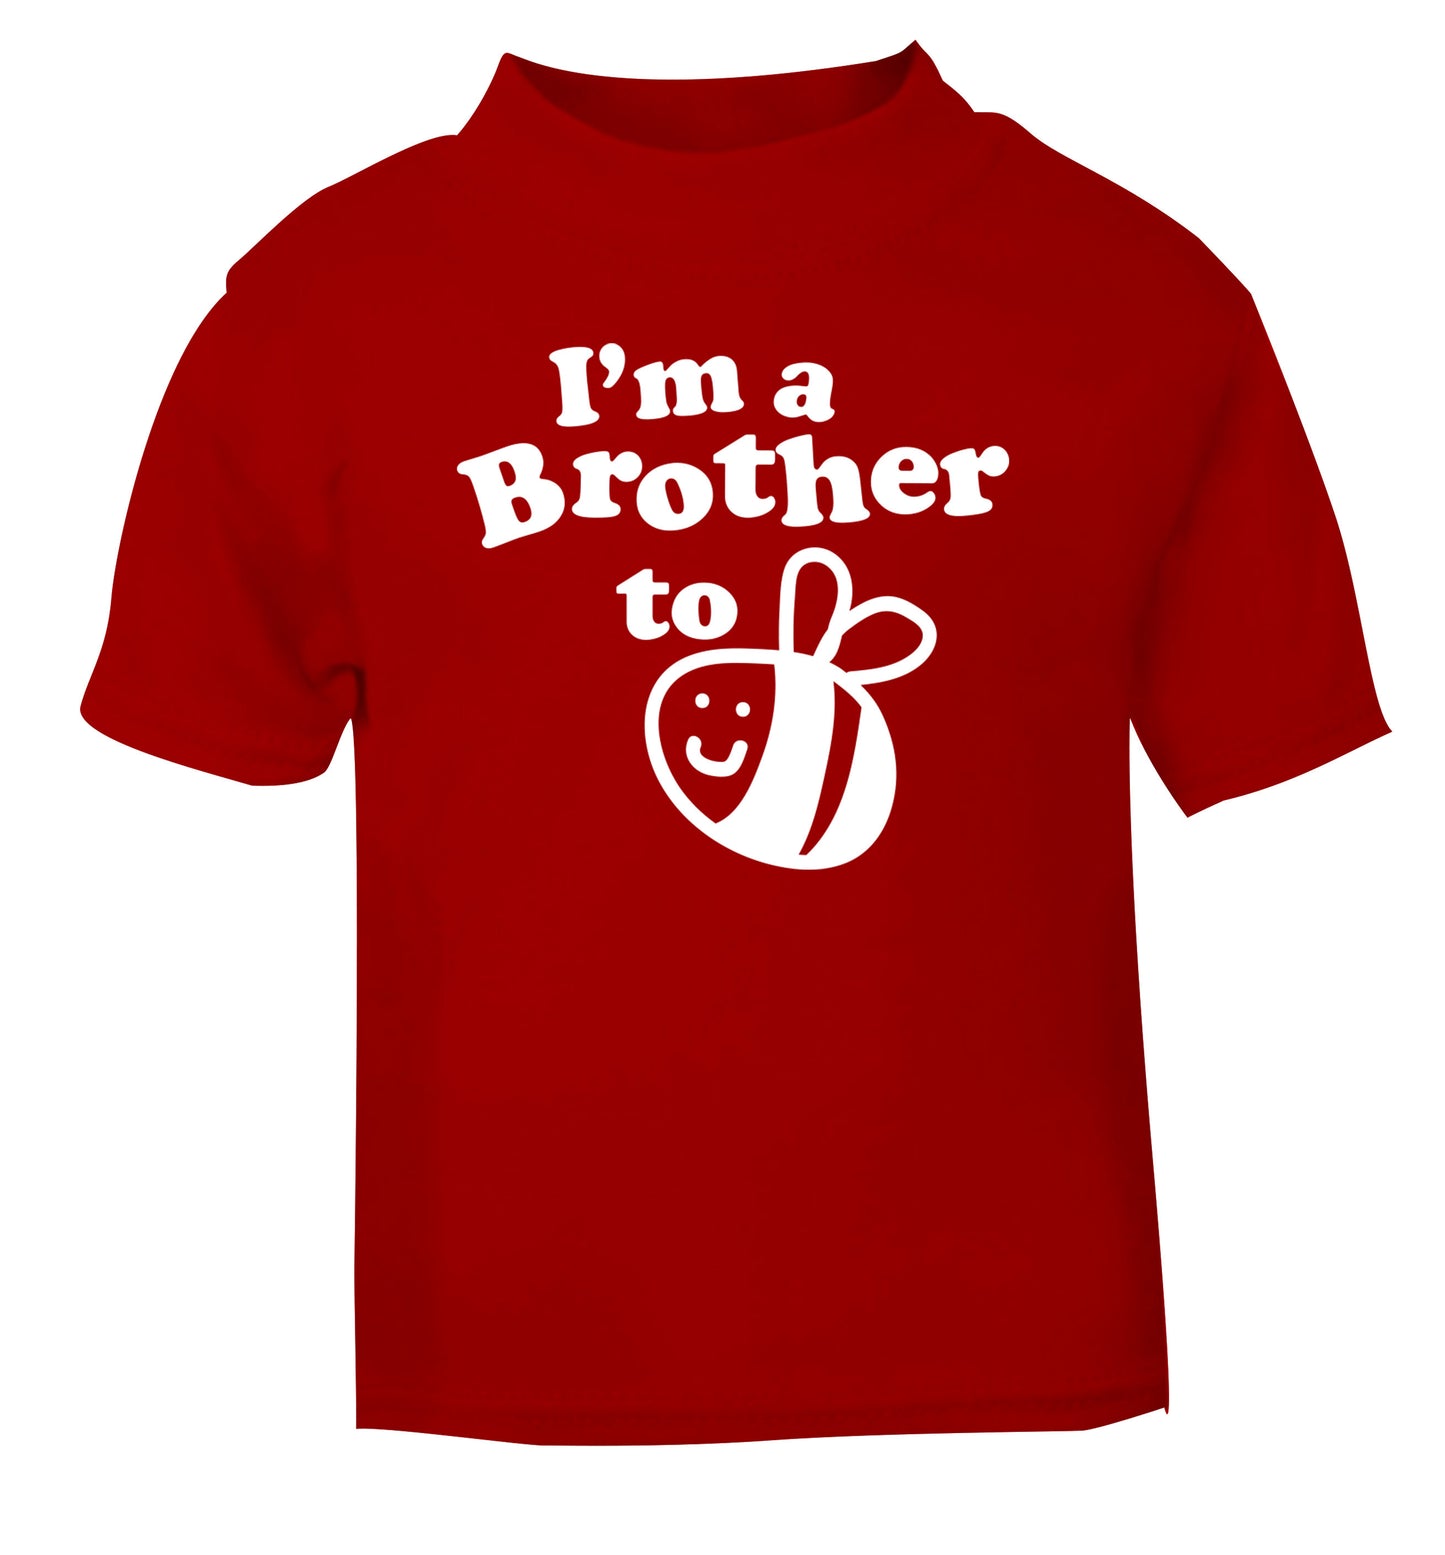 I'm a brother to be red Baby Toddler Tshirt 2 Years